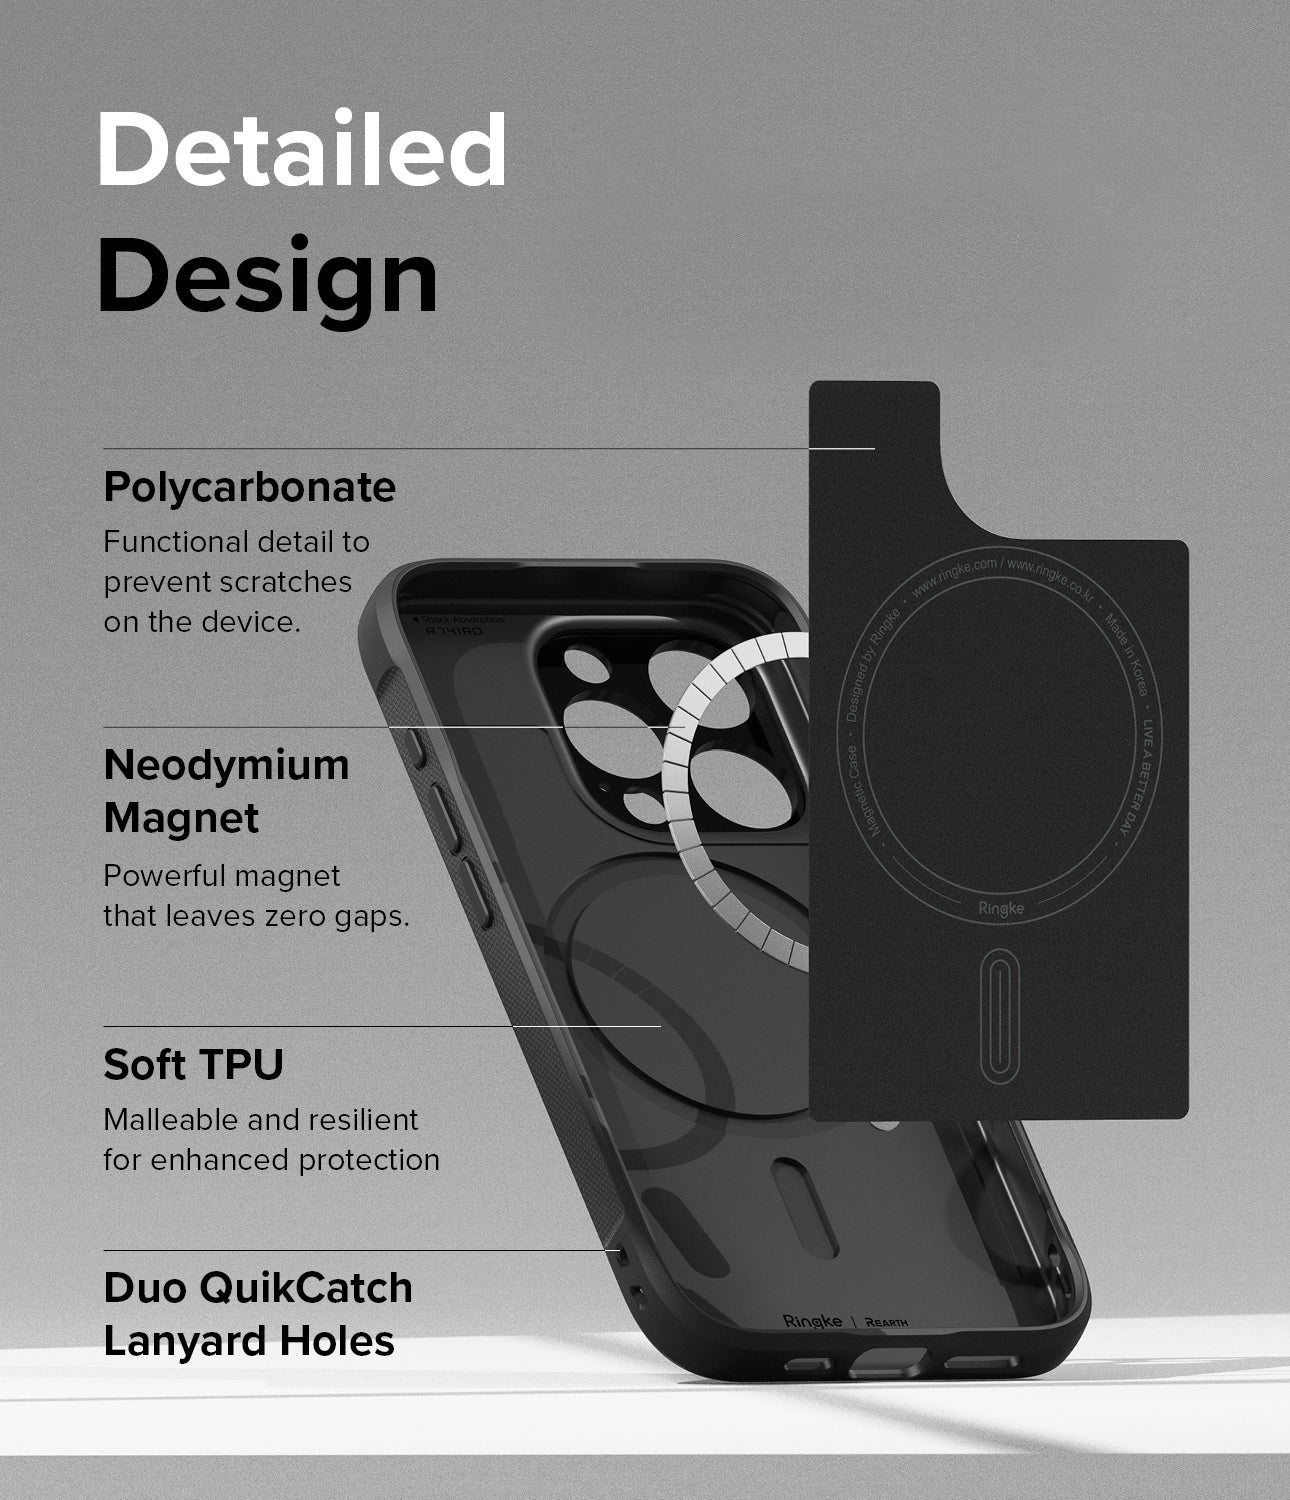 iPhone 15 Pro Case | Onyx Magnetic - Detailed Design. Functional detail to prevent scratches on the device with Polycarbonate. Powerful Neodymium Magnet that leaves zero gap. Soft TPU for malleable and resilient for enhanced protection. Duo QuikCatch Lanyard Holes.